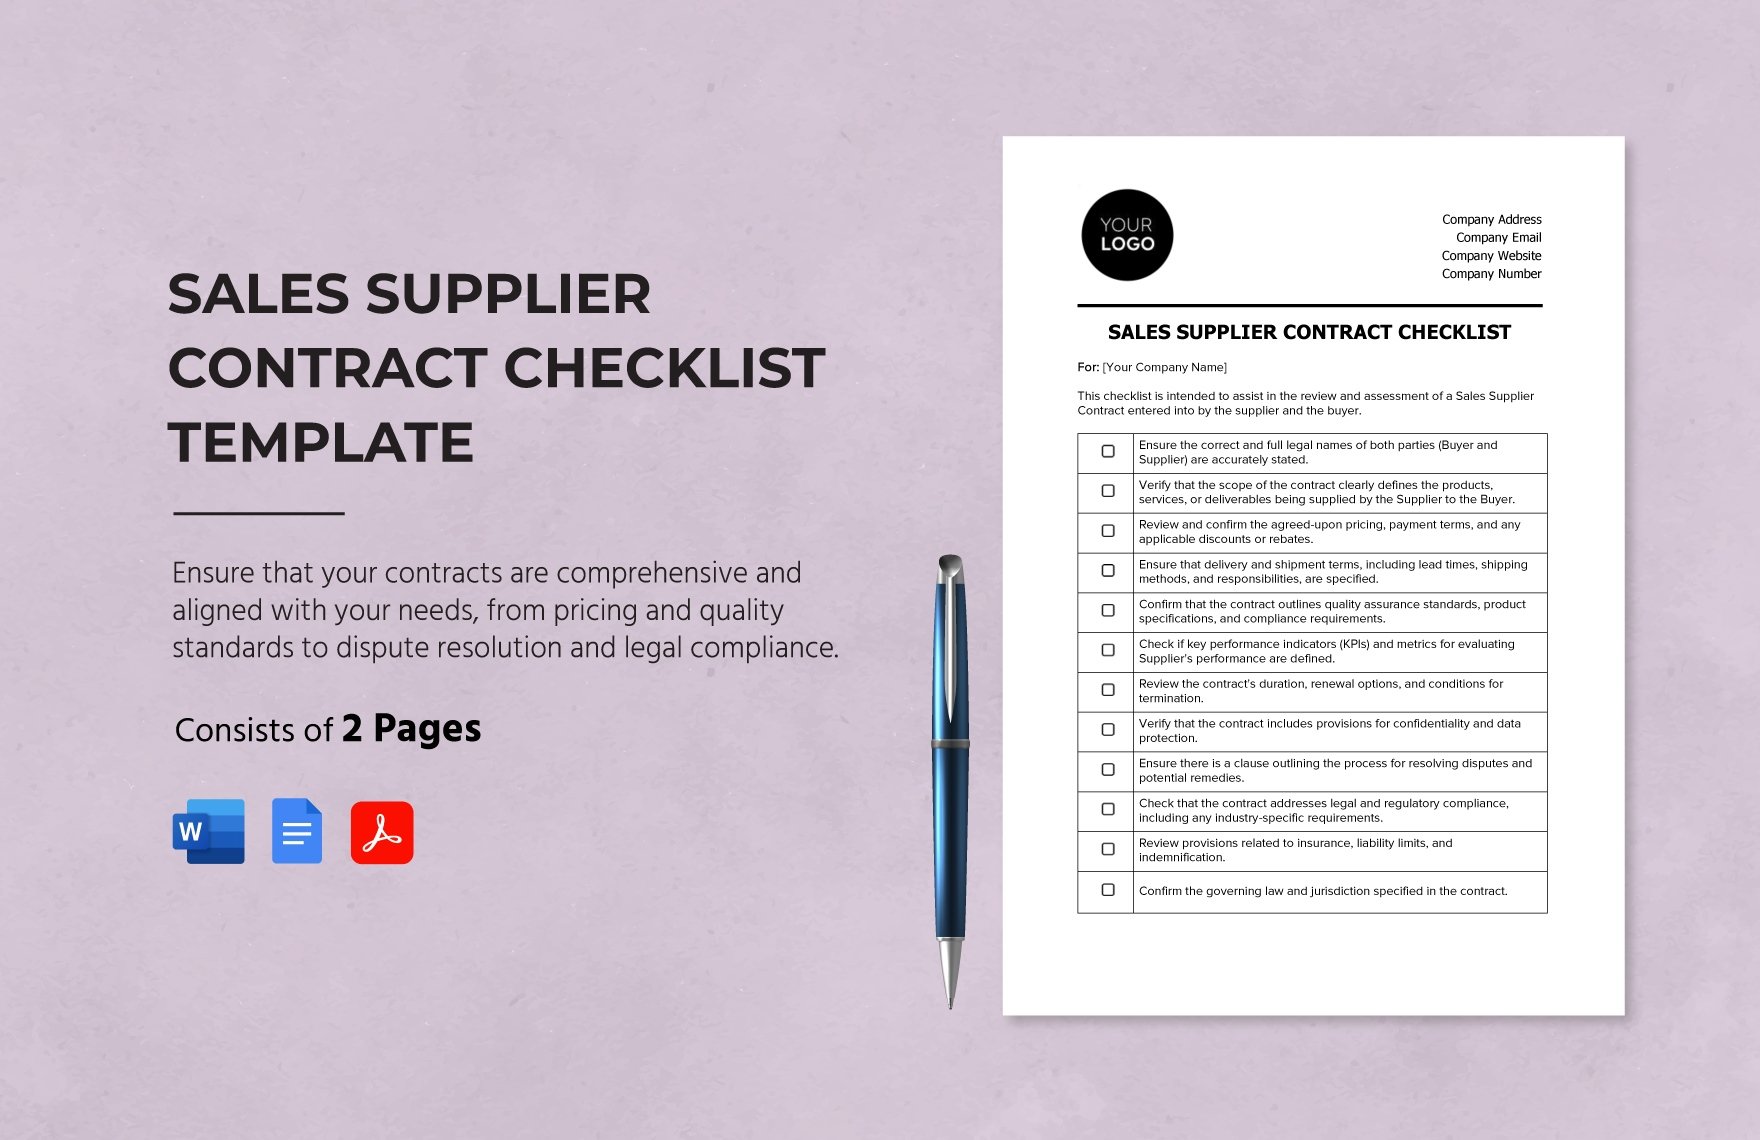 Sales Supplier Contract Checklist Template in Word, Google Docs, PDF